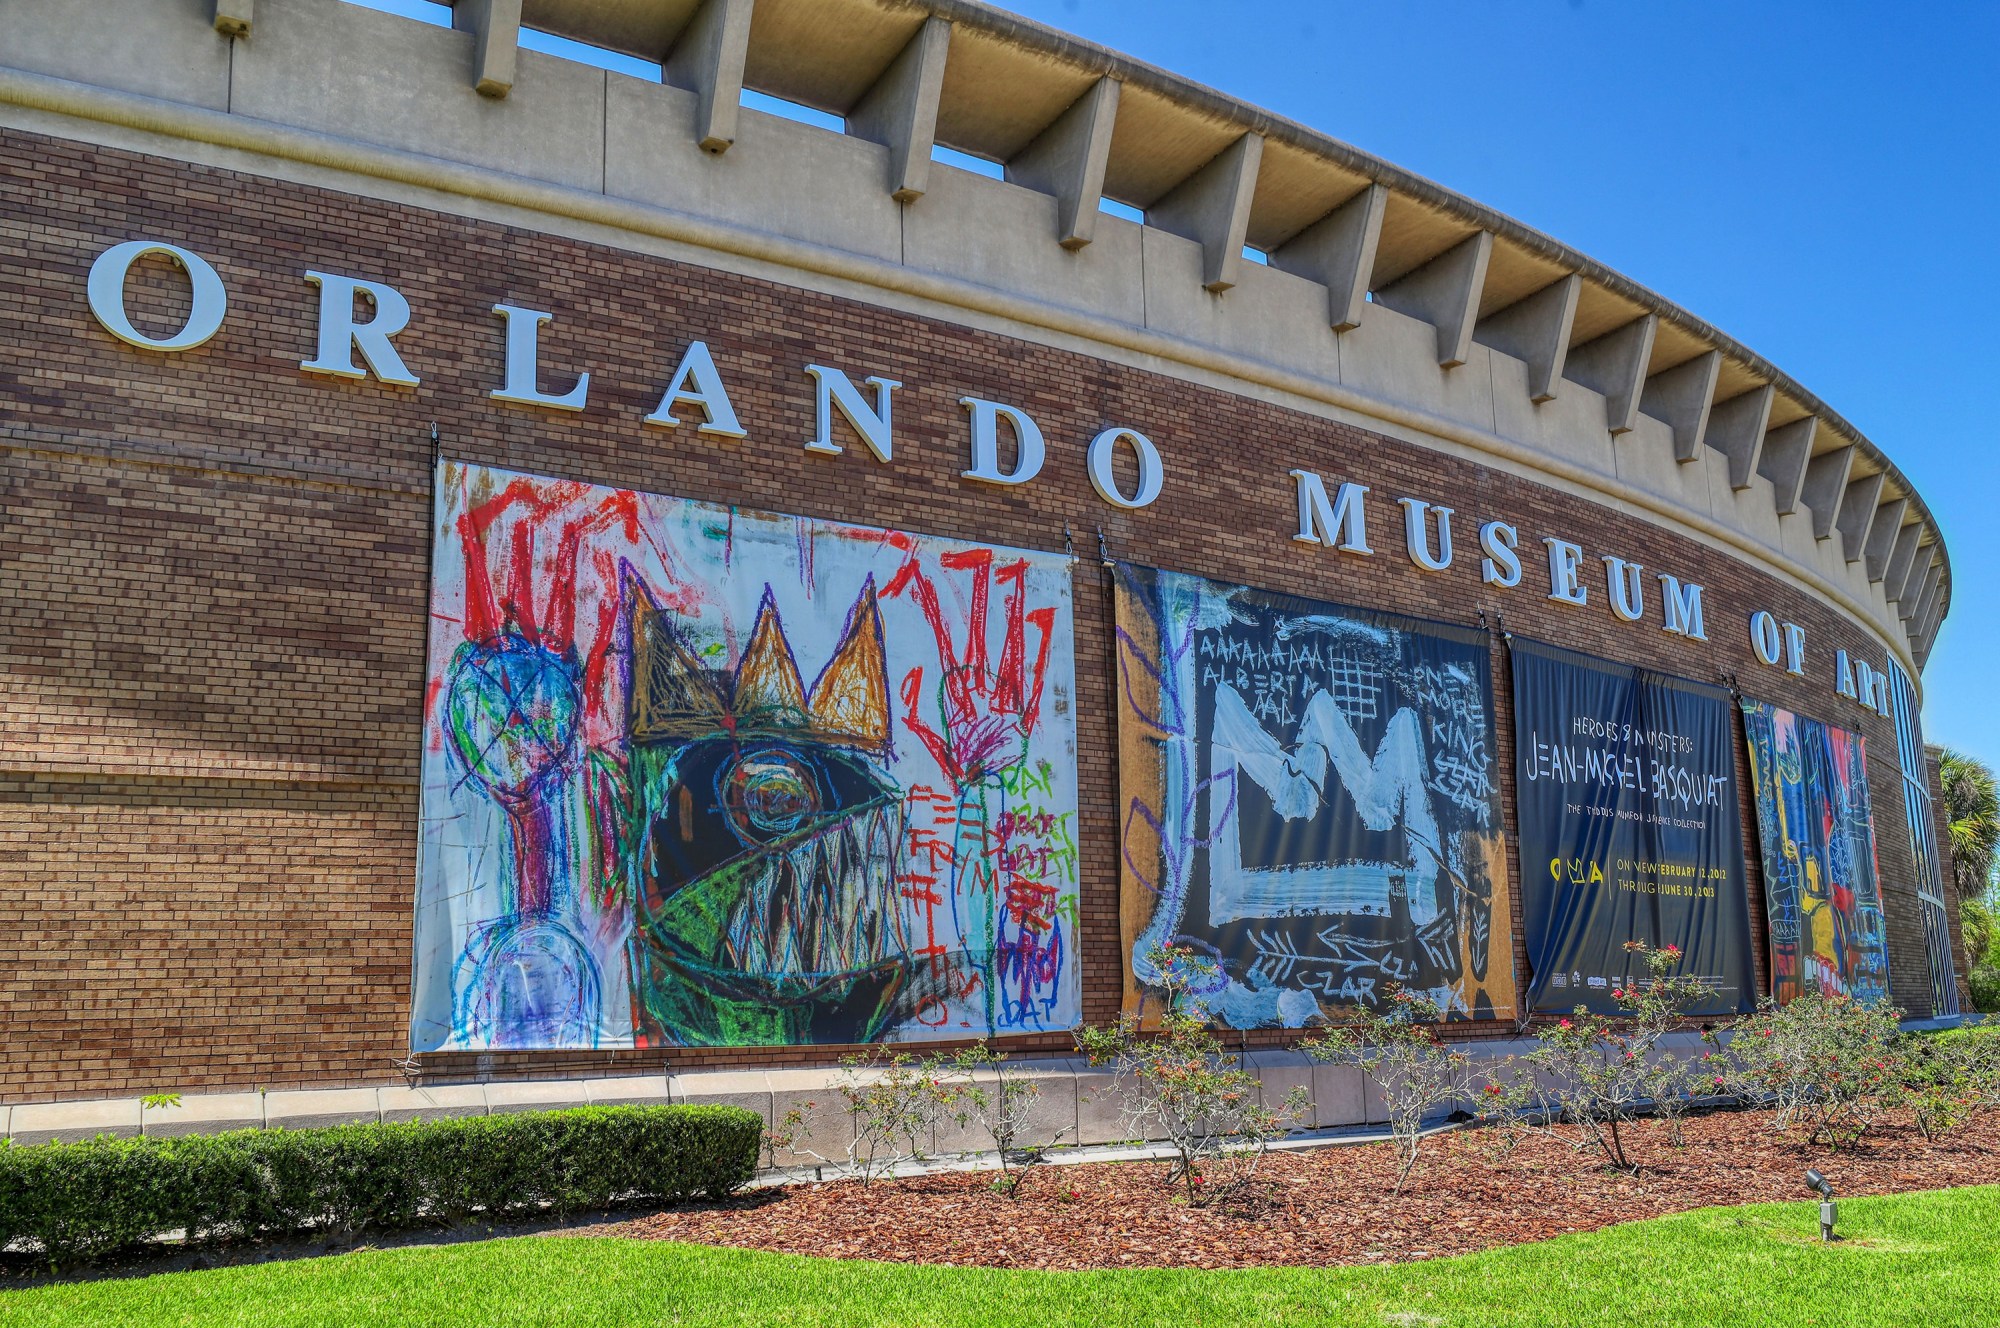 Brushy Basquiat-style paintings adorn banners on a low, cylindrical brick building that bears the words "Orlando Museum of Art."